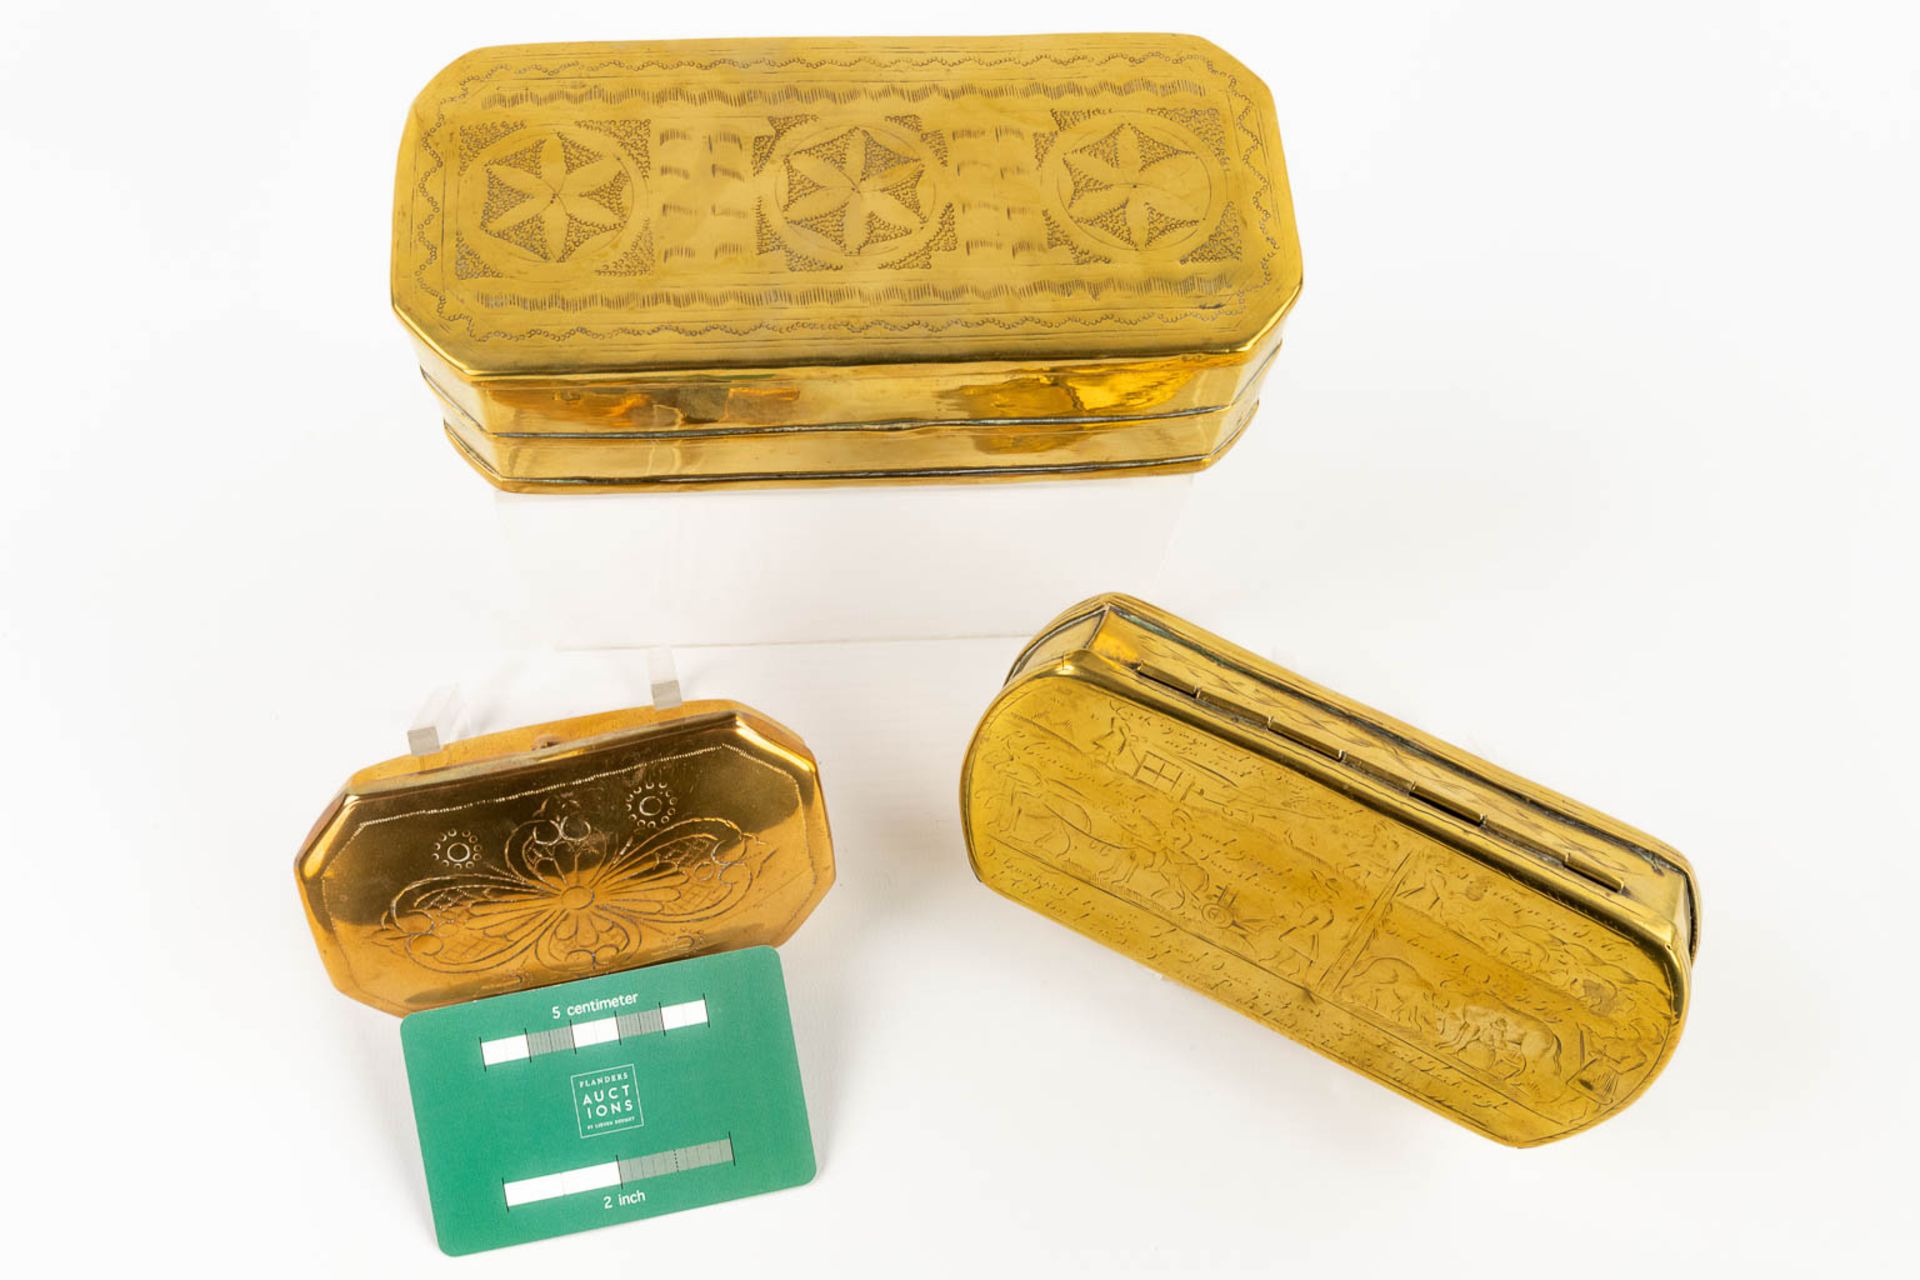 A collection of 3 antique oval tobacco boxes, made of copper. 18th/19th C. (L: 7 x W: 12 x H: 3,5 cm - Image 2 of 13